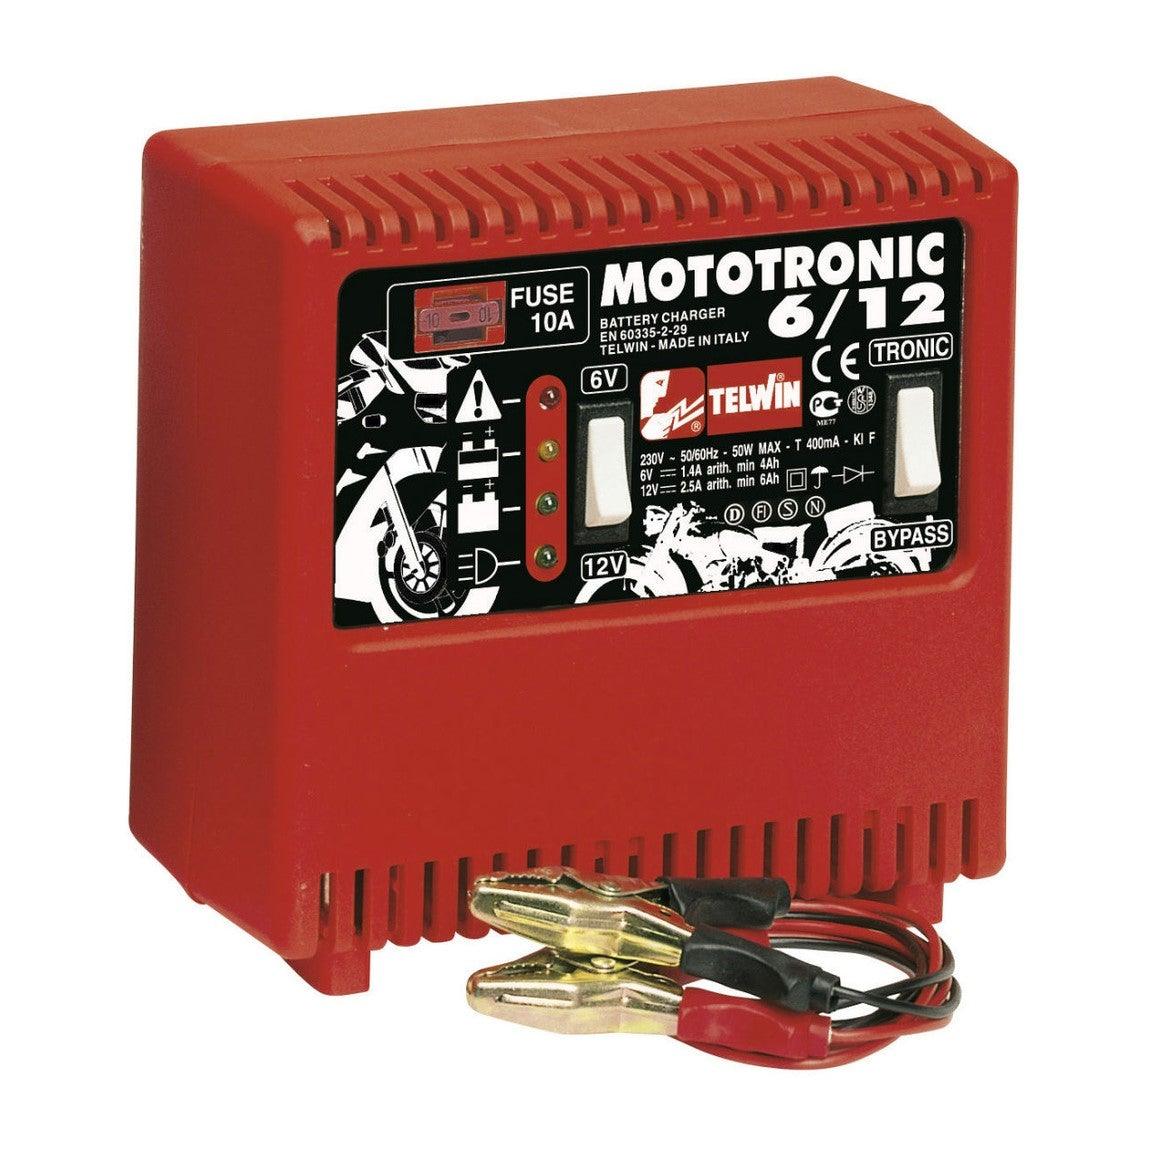 Mototronic 6-12: Battery Charger Trading Takla —